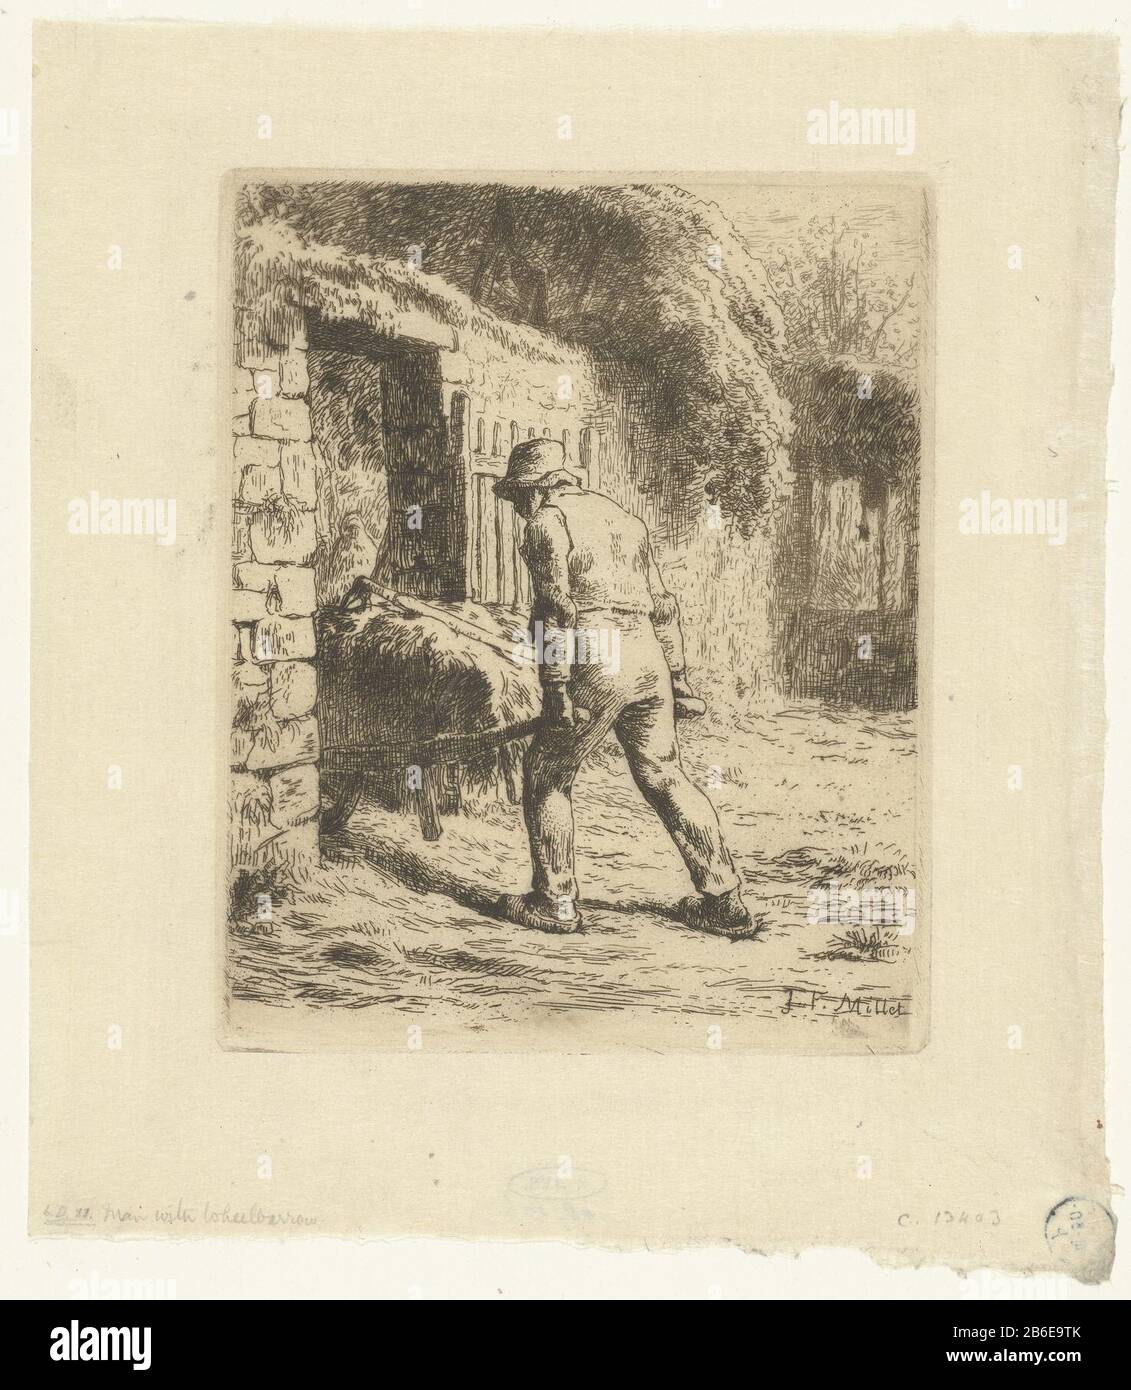 Farmer walks with wheelbarrow on barnyard Le paysan rentrant du fumier Farmer walking with wheelbarrow on boerenerfLe paysan rentrant du fumier Object Type : picture Item number: RP-P-1949-106Catalogusreferentie: Delteil 11-3 (4) Marking / Brands: collector's mark, reverse bottom center, stamped: Lugt 2228stempel , verso left, stamped: round stamp with letters and numbers, unintelligible manufacture manufacturer: printmaker: Jean-François Millet (listed building) in its design: Jean-François Millet Date: 1855 Physical features: etching on thin paper material: paper Technique: etching dimension Stock Photo